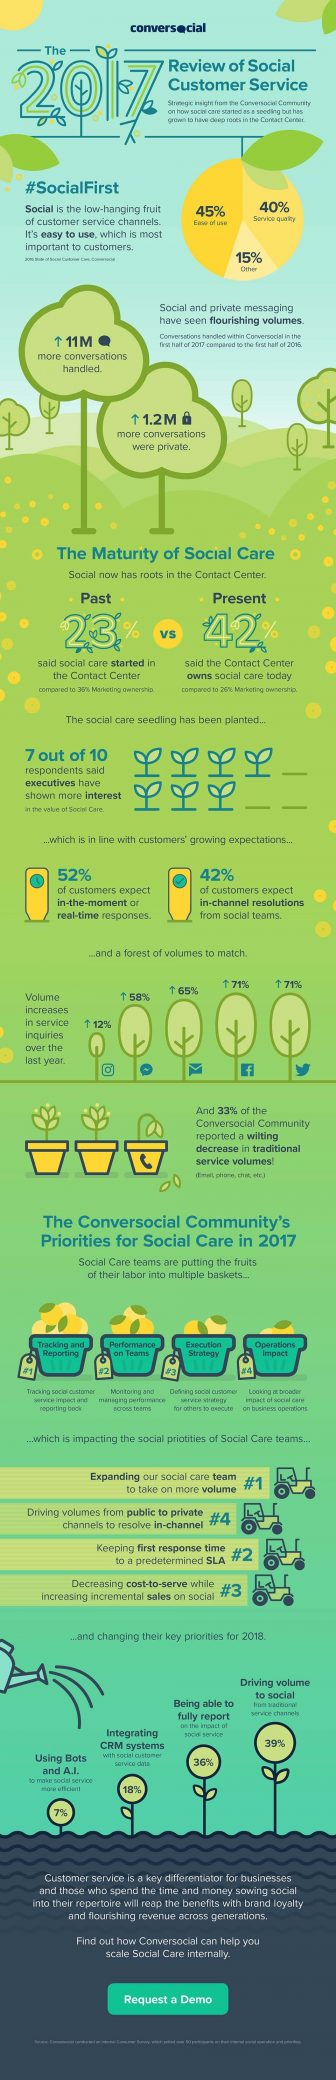 The Review of Social Customer Service [Infographic]